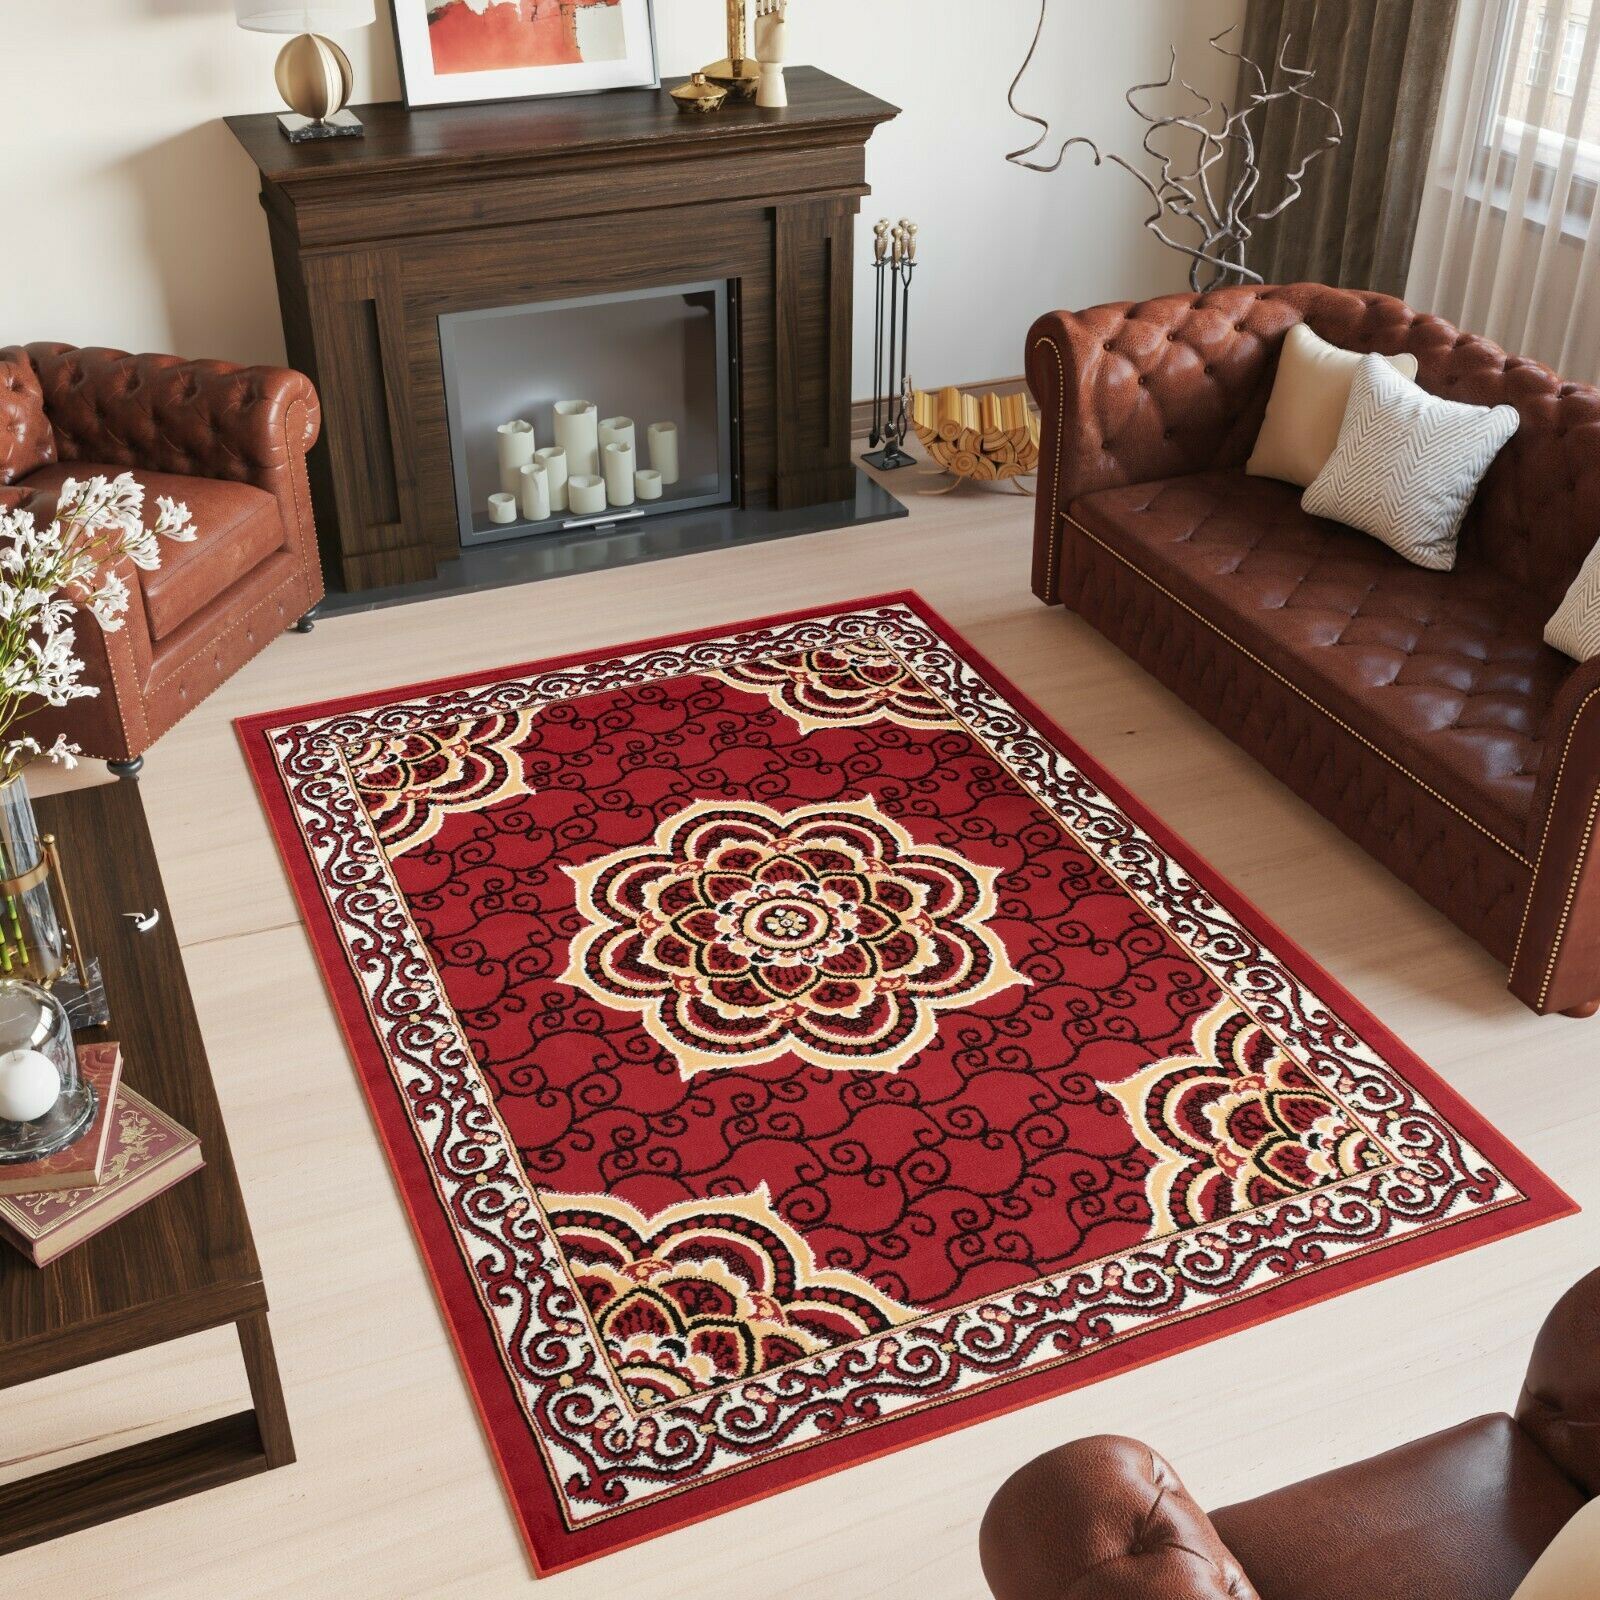 Classic Red / Burgundy Area Rugs Traditional Design Ornaments Living Room Carpet eBay